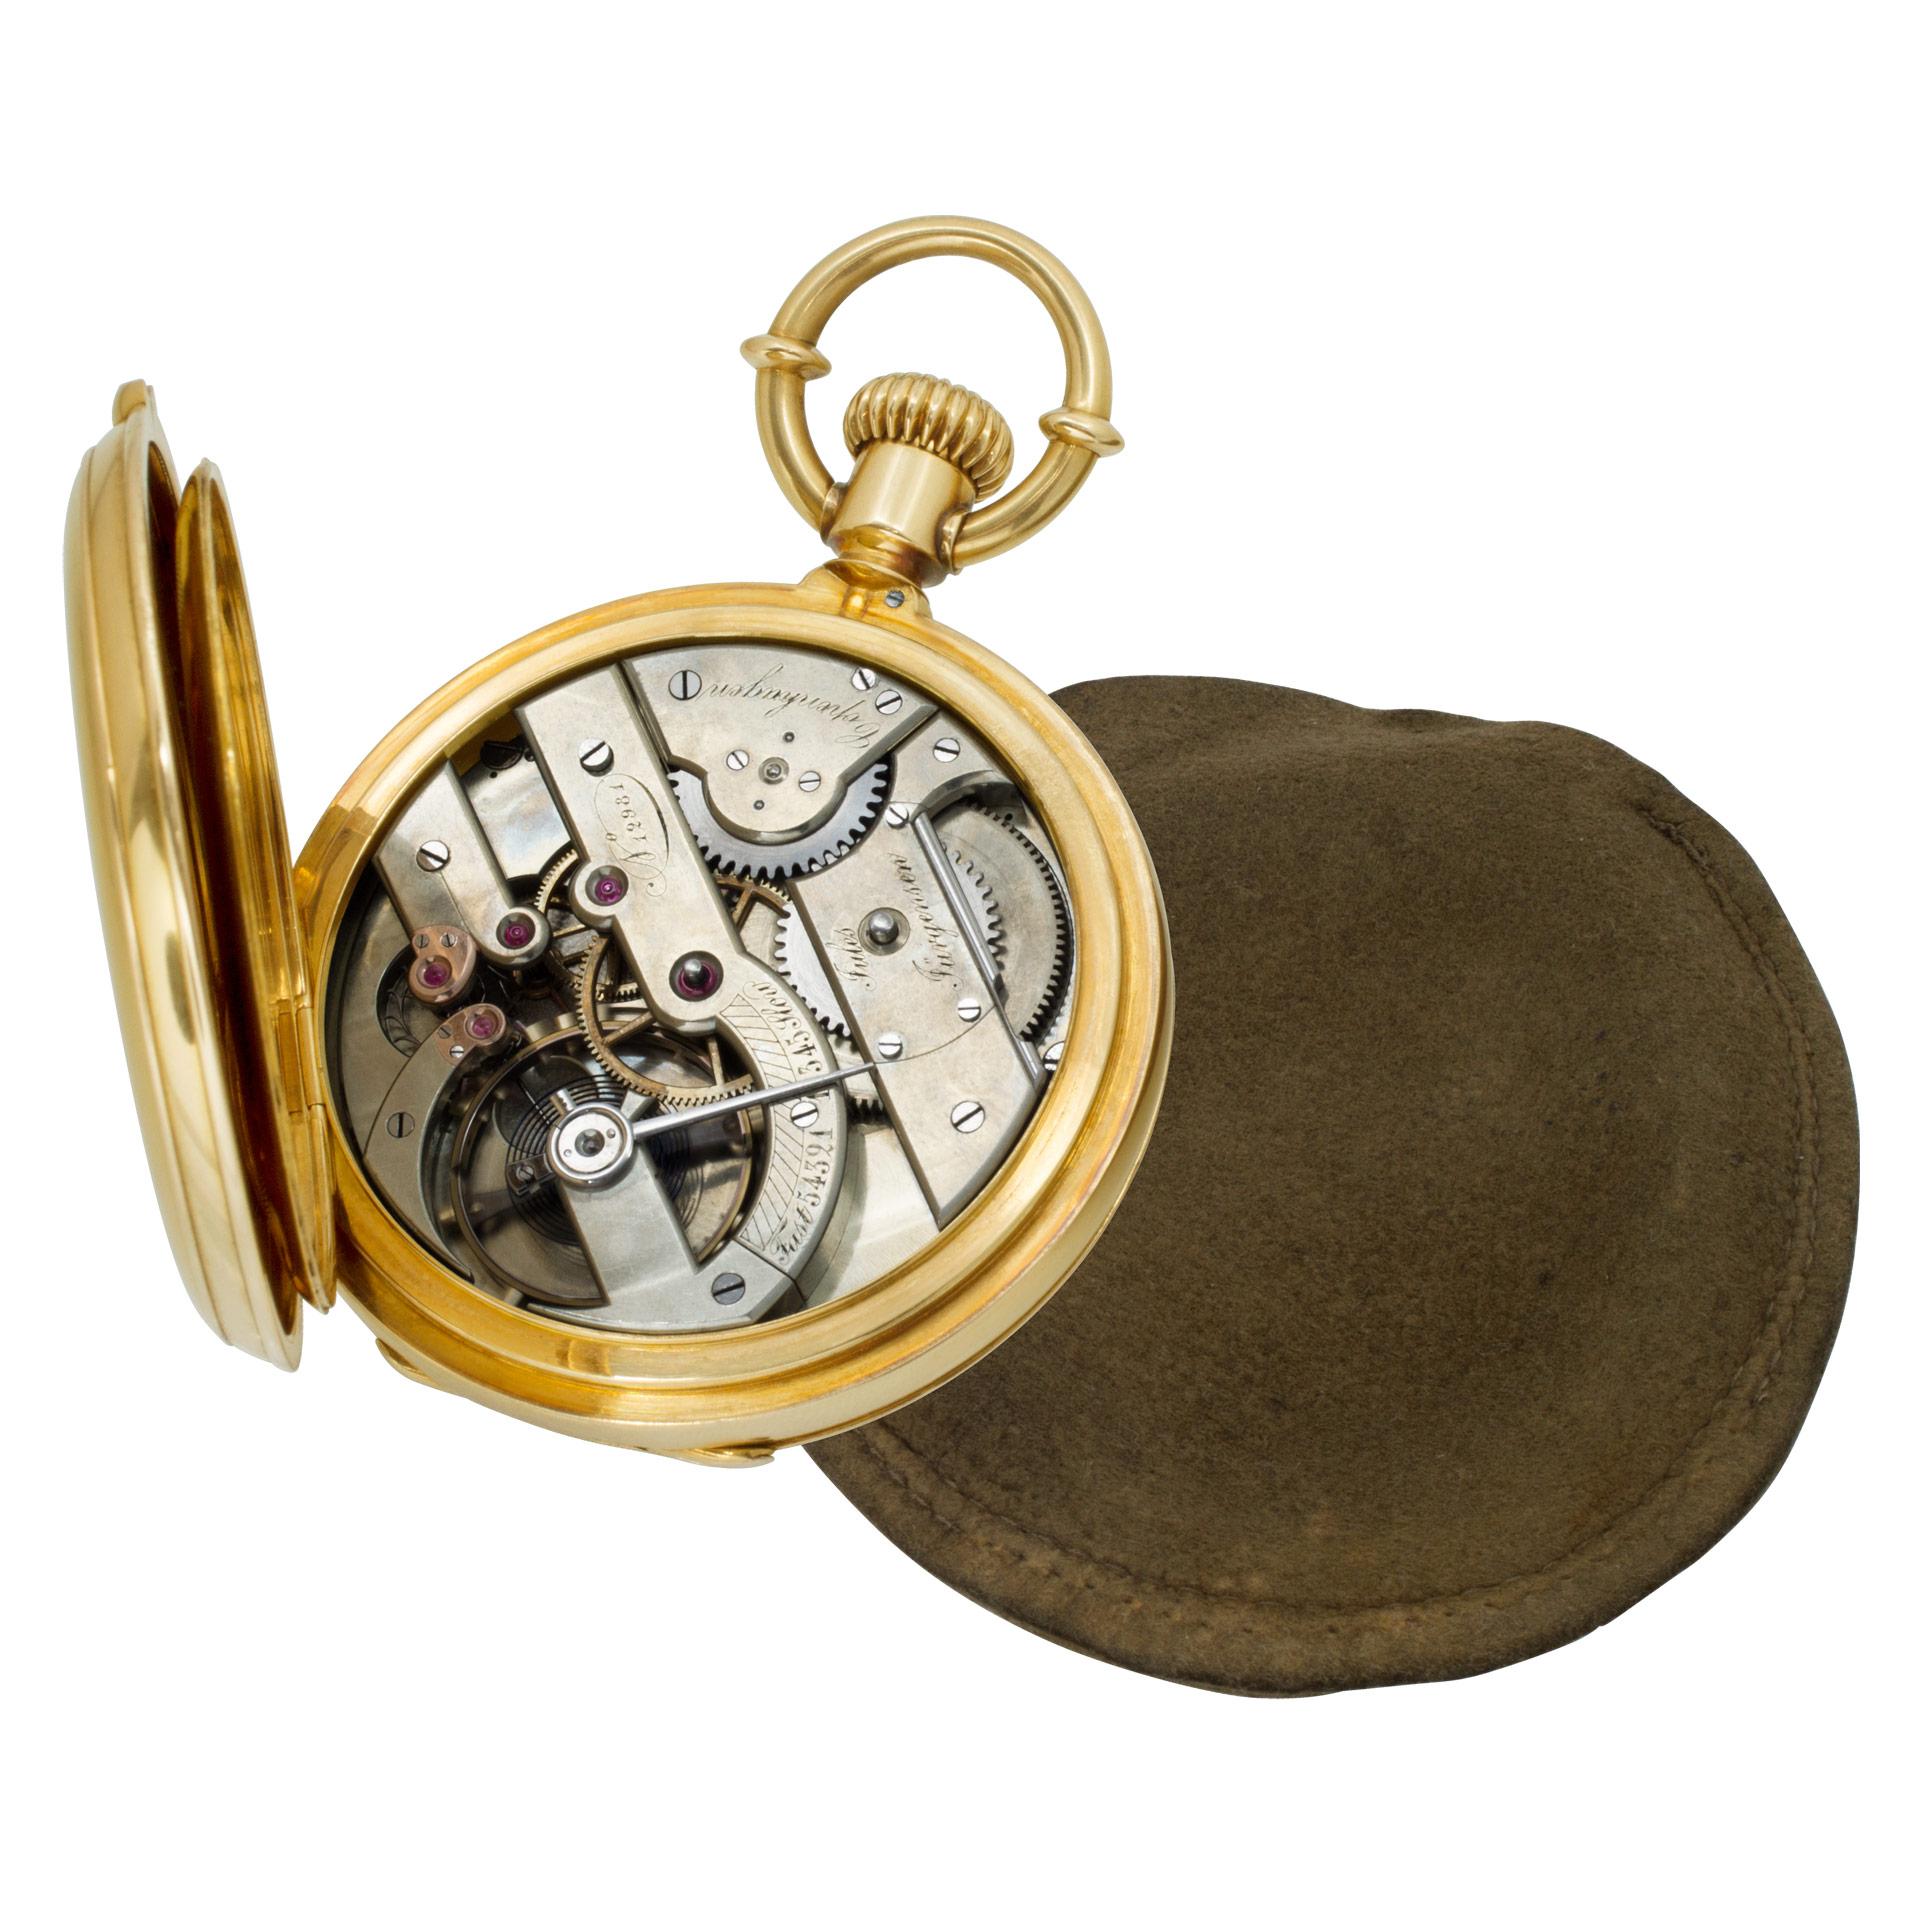 Jules Jurgensen hunter case pocket watch with porcelain dial and moon hands in 18k yellow gold . Barley corn engine turned front and back lid. Manual 18 jewel movement w/ subseconds. Patented bow set. 54.5mm case size. Circa 1890s. Fine Pre-owned